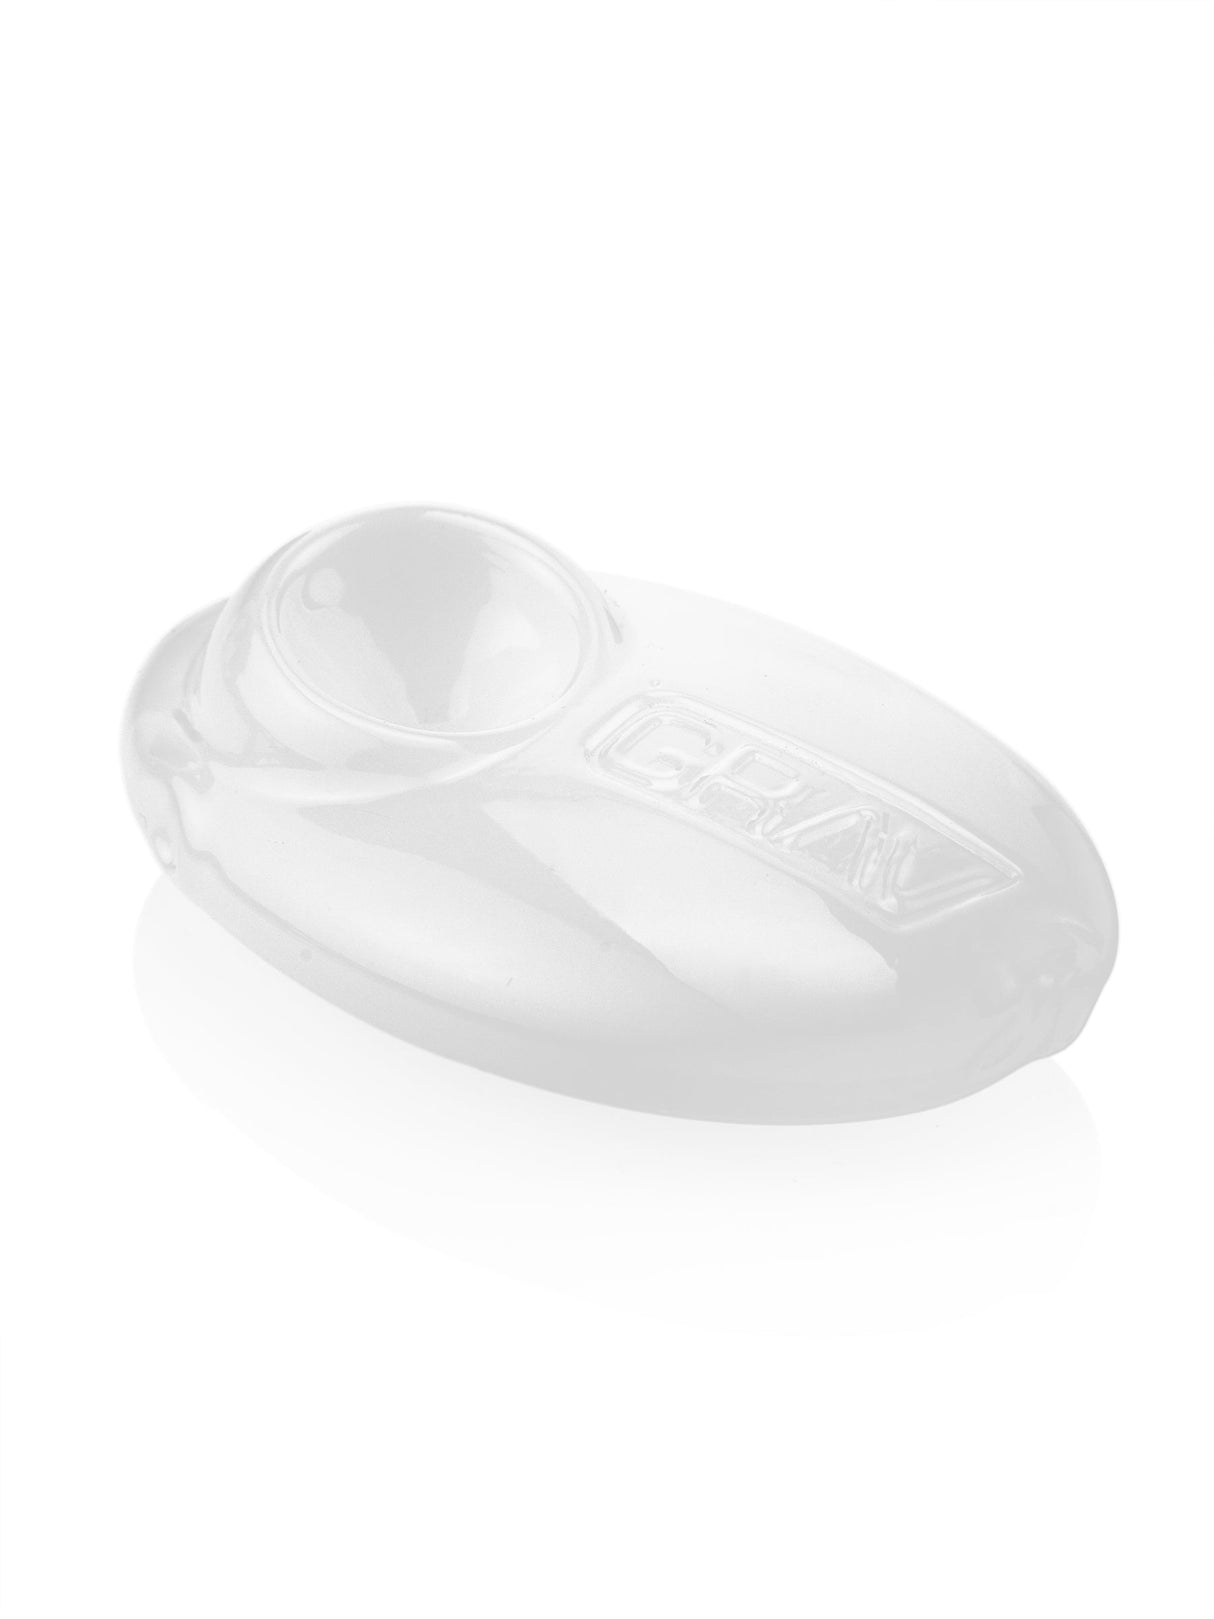 GRAV Pebble Spoon in White - Compact Borosilicate Glass Hand Pipe for Dry Herbs, 3" Size